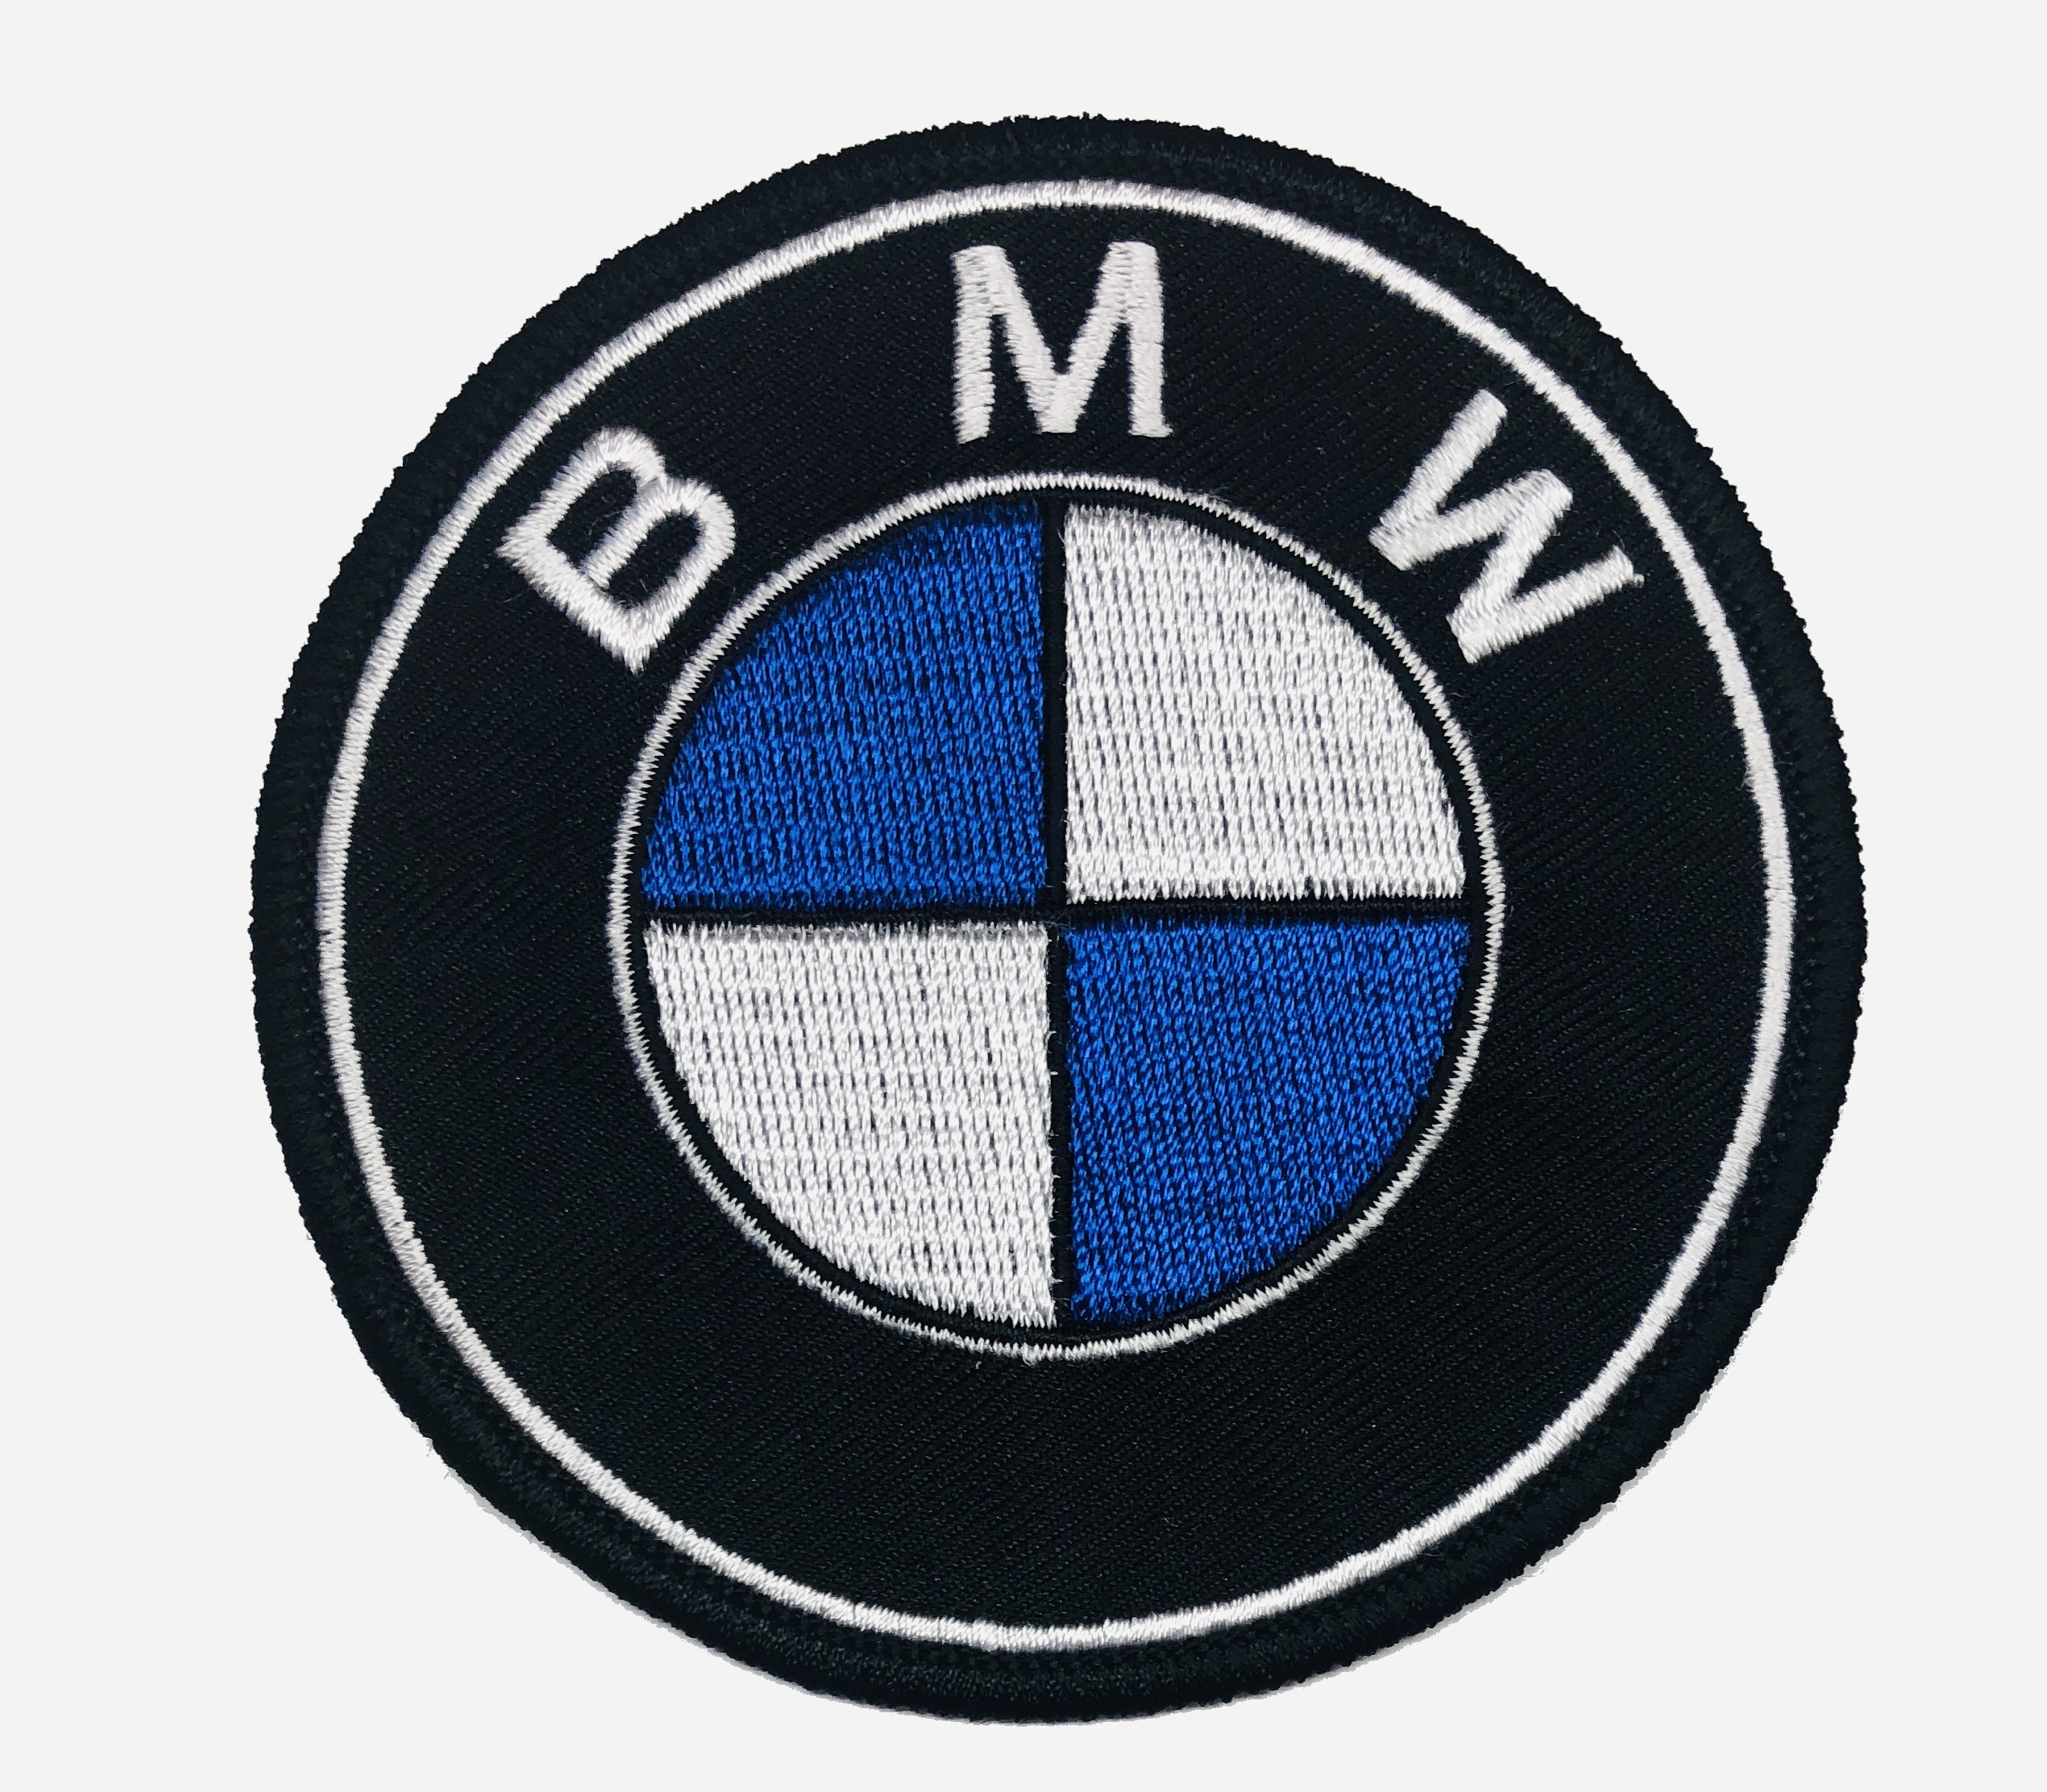 BMW Car Brand Logo Patch Iron On Patch Sew On Embroidered Patch 